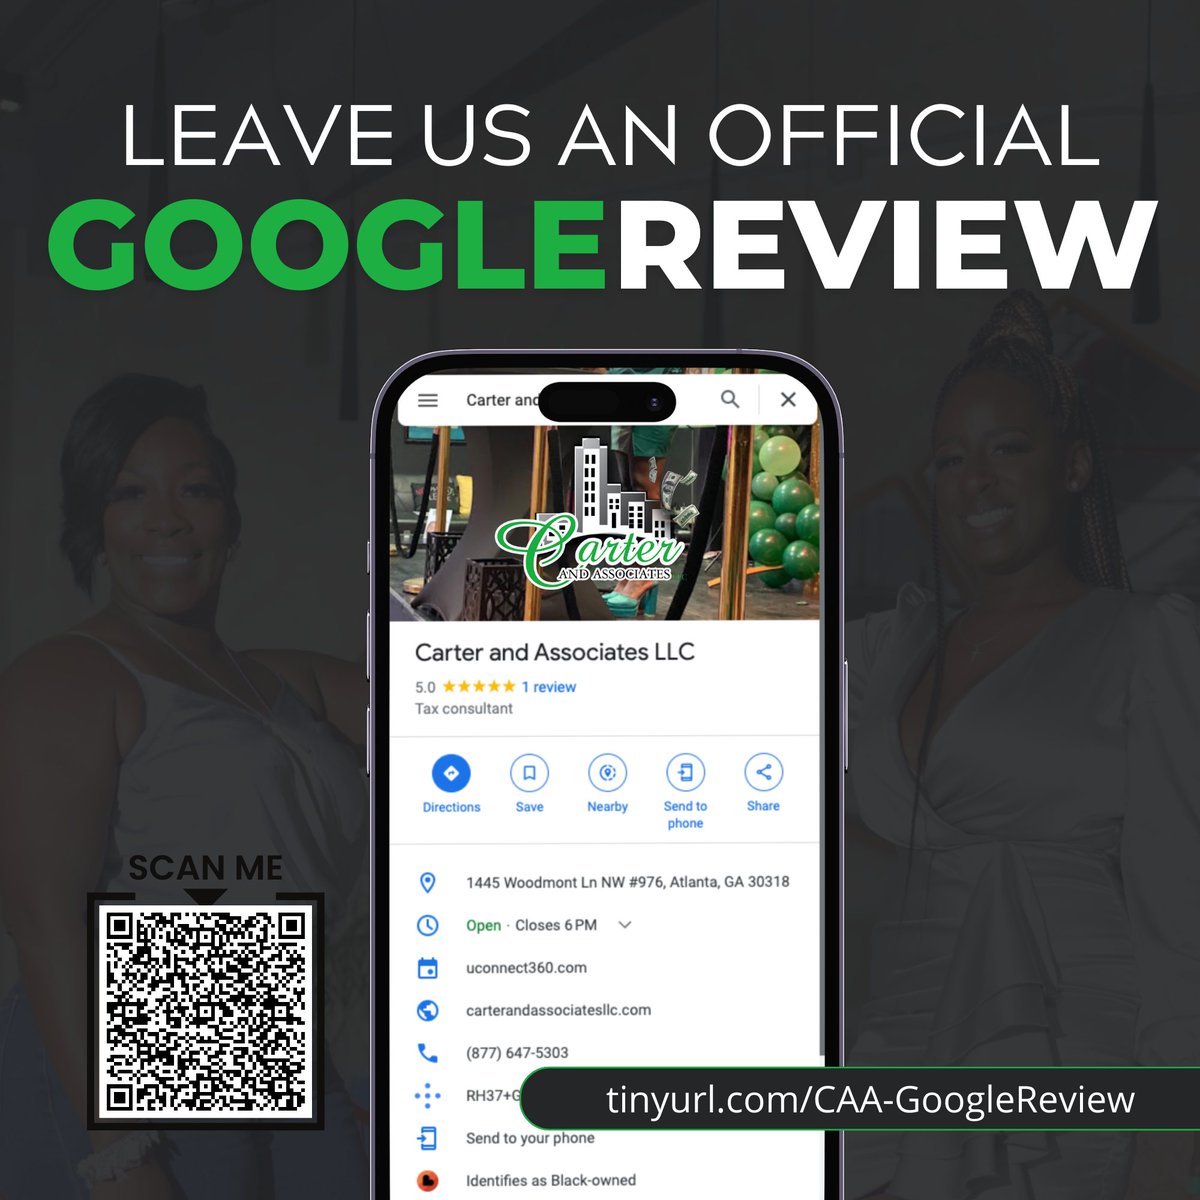 By scanning the QR code and leaving a review right away, you can share your Carter and Associates LLC experience!

#TeamCarter #Carterandassociatesllc #CustomerExperience #ProductQuality #ServiceExcellence #SatisfiedCustomer #HappyCustomer #HighlyRecommended